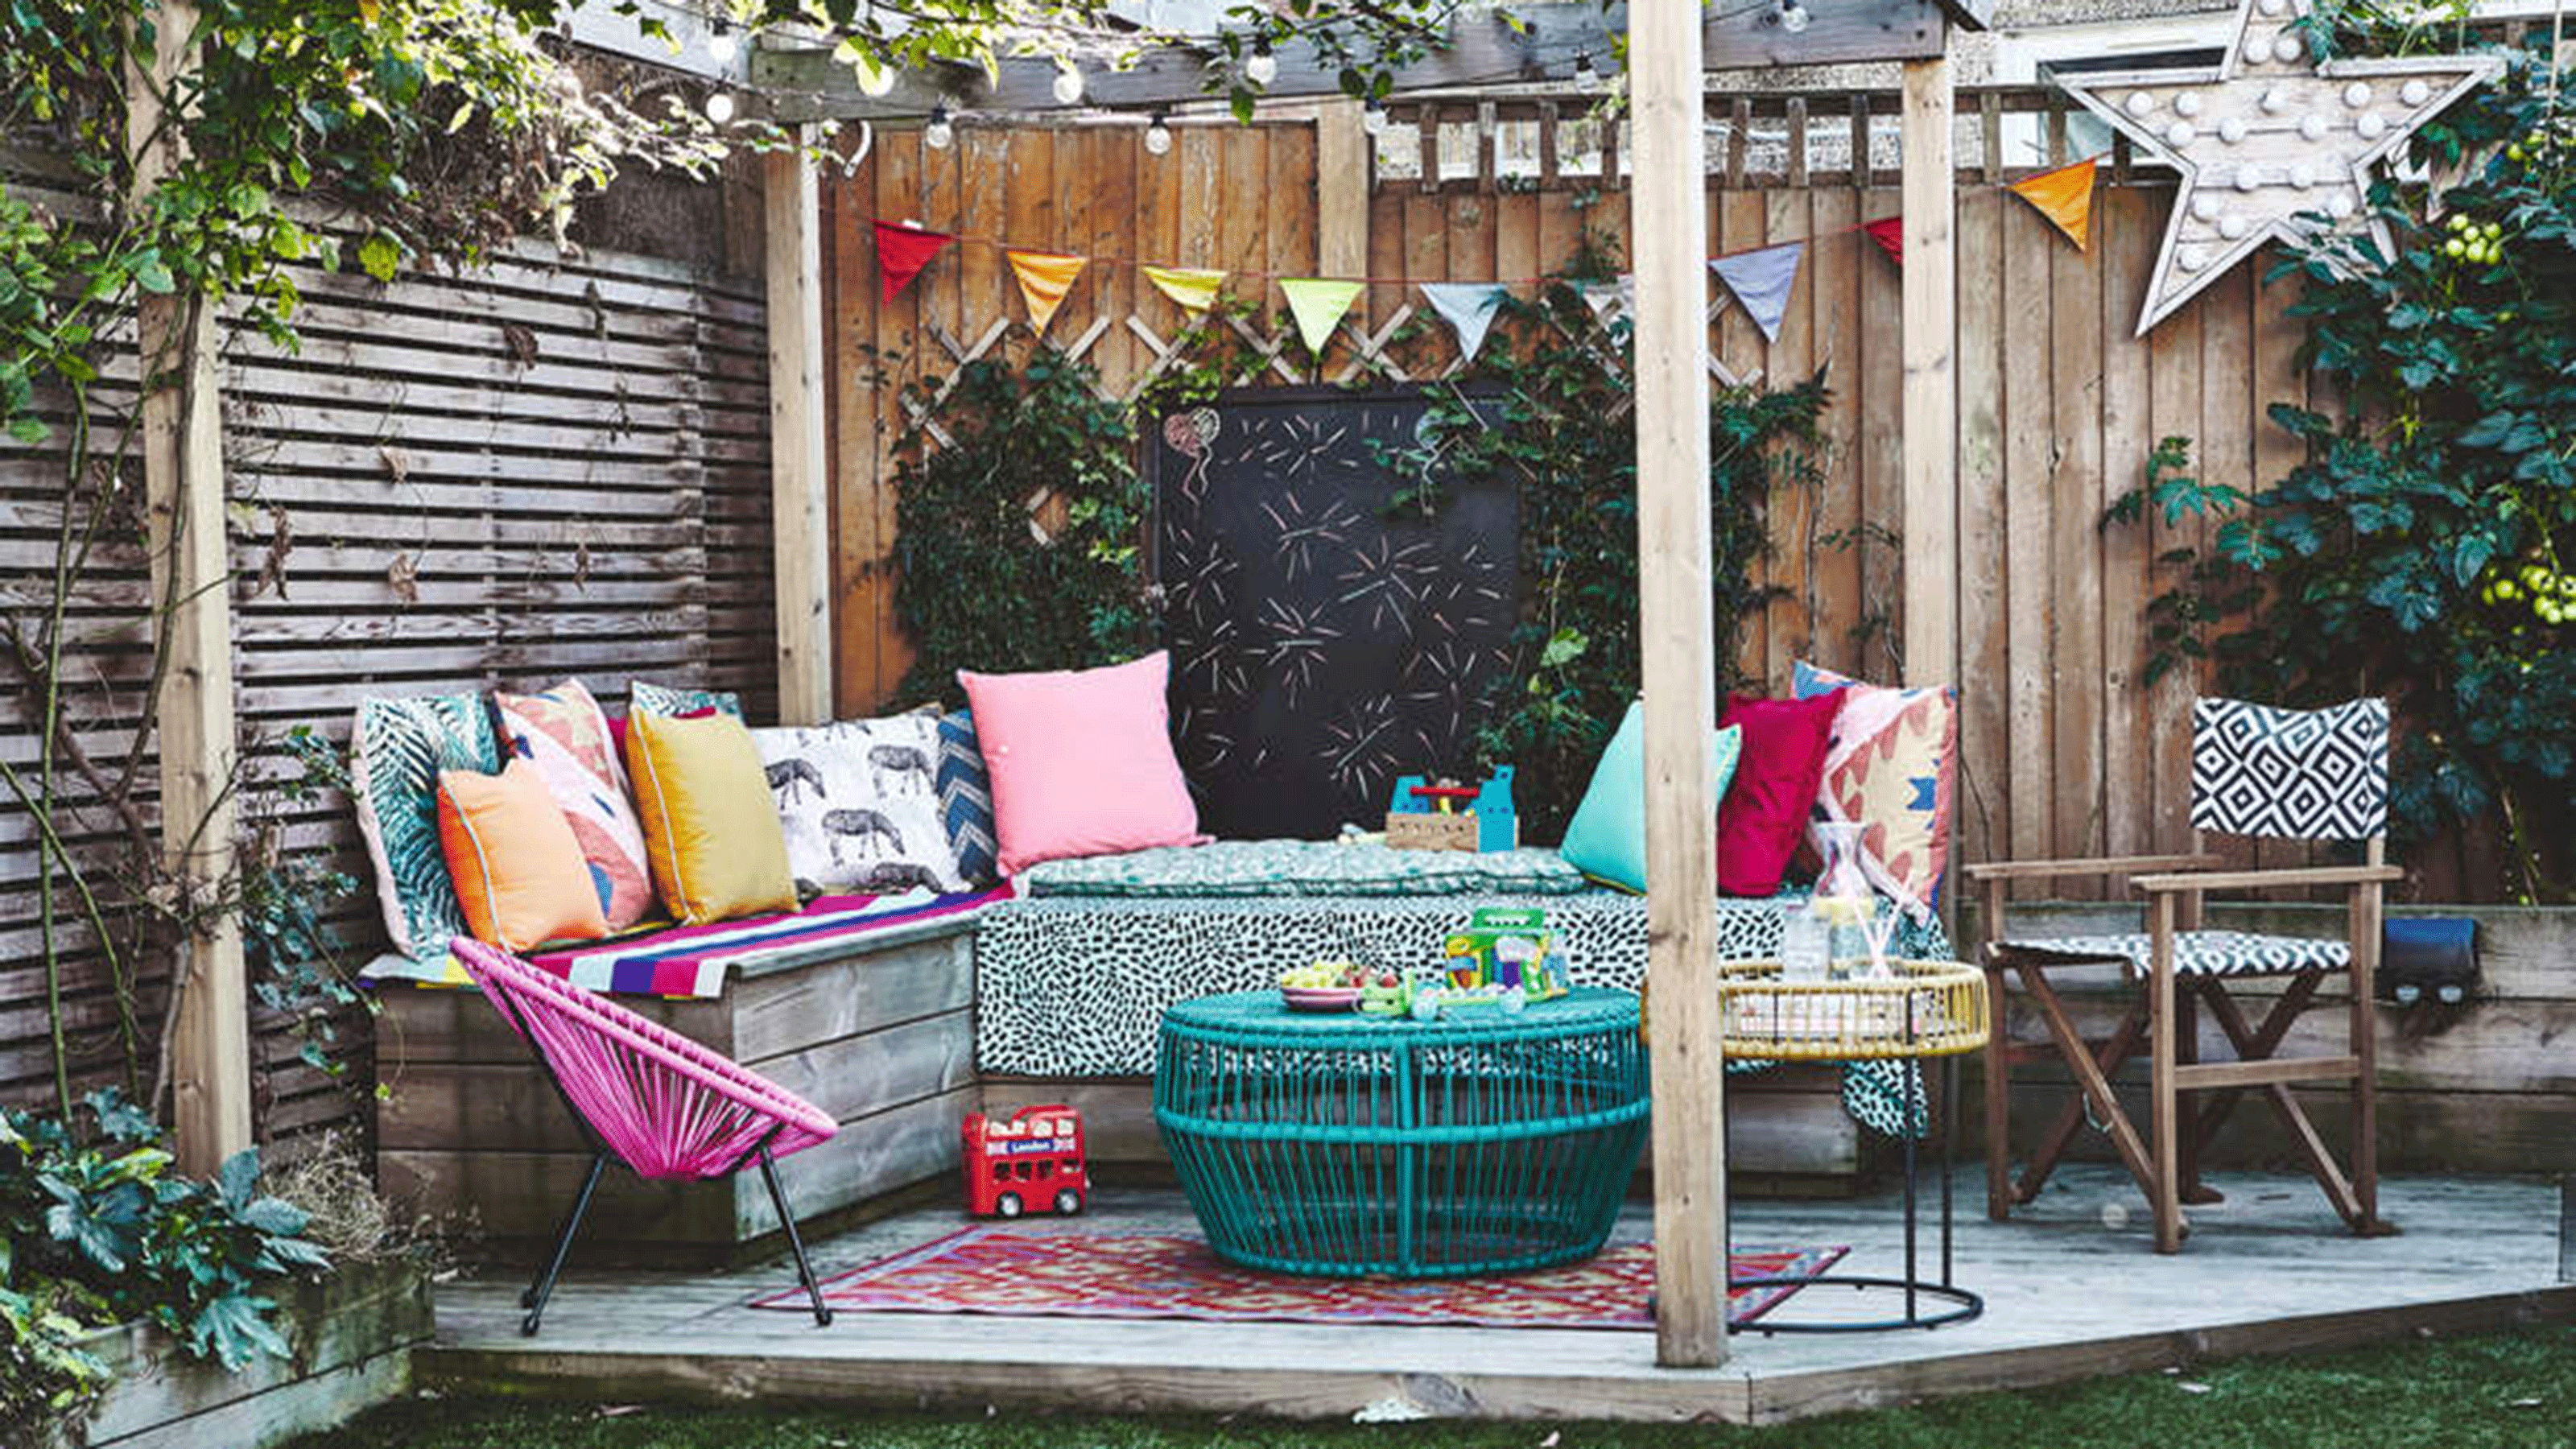 A kids activity area on a deck with chalkboard, bunting and colorful accessories